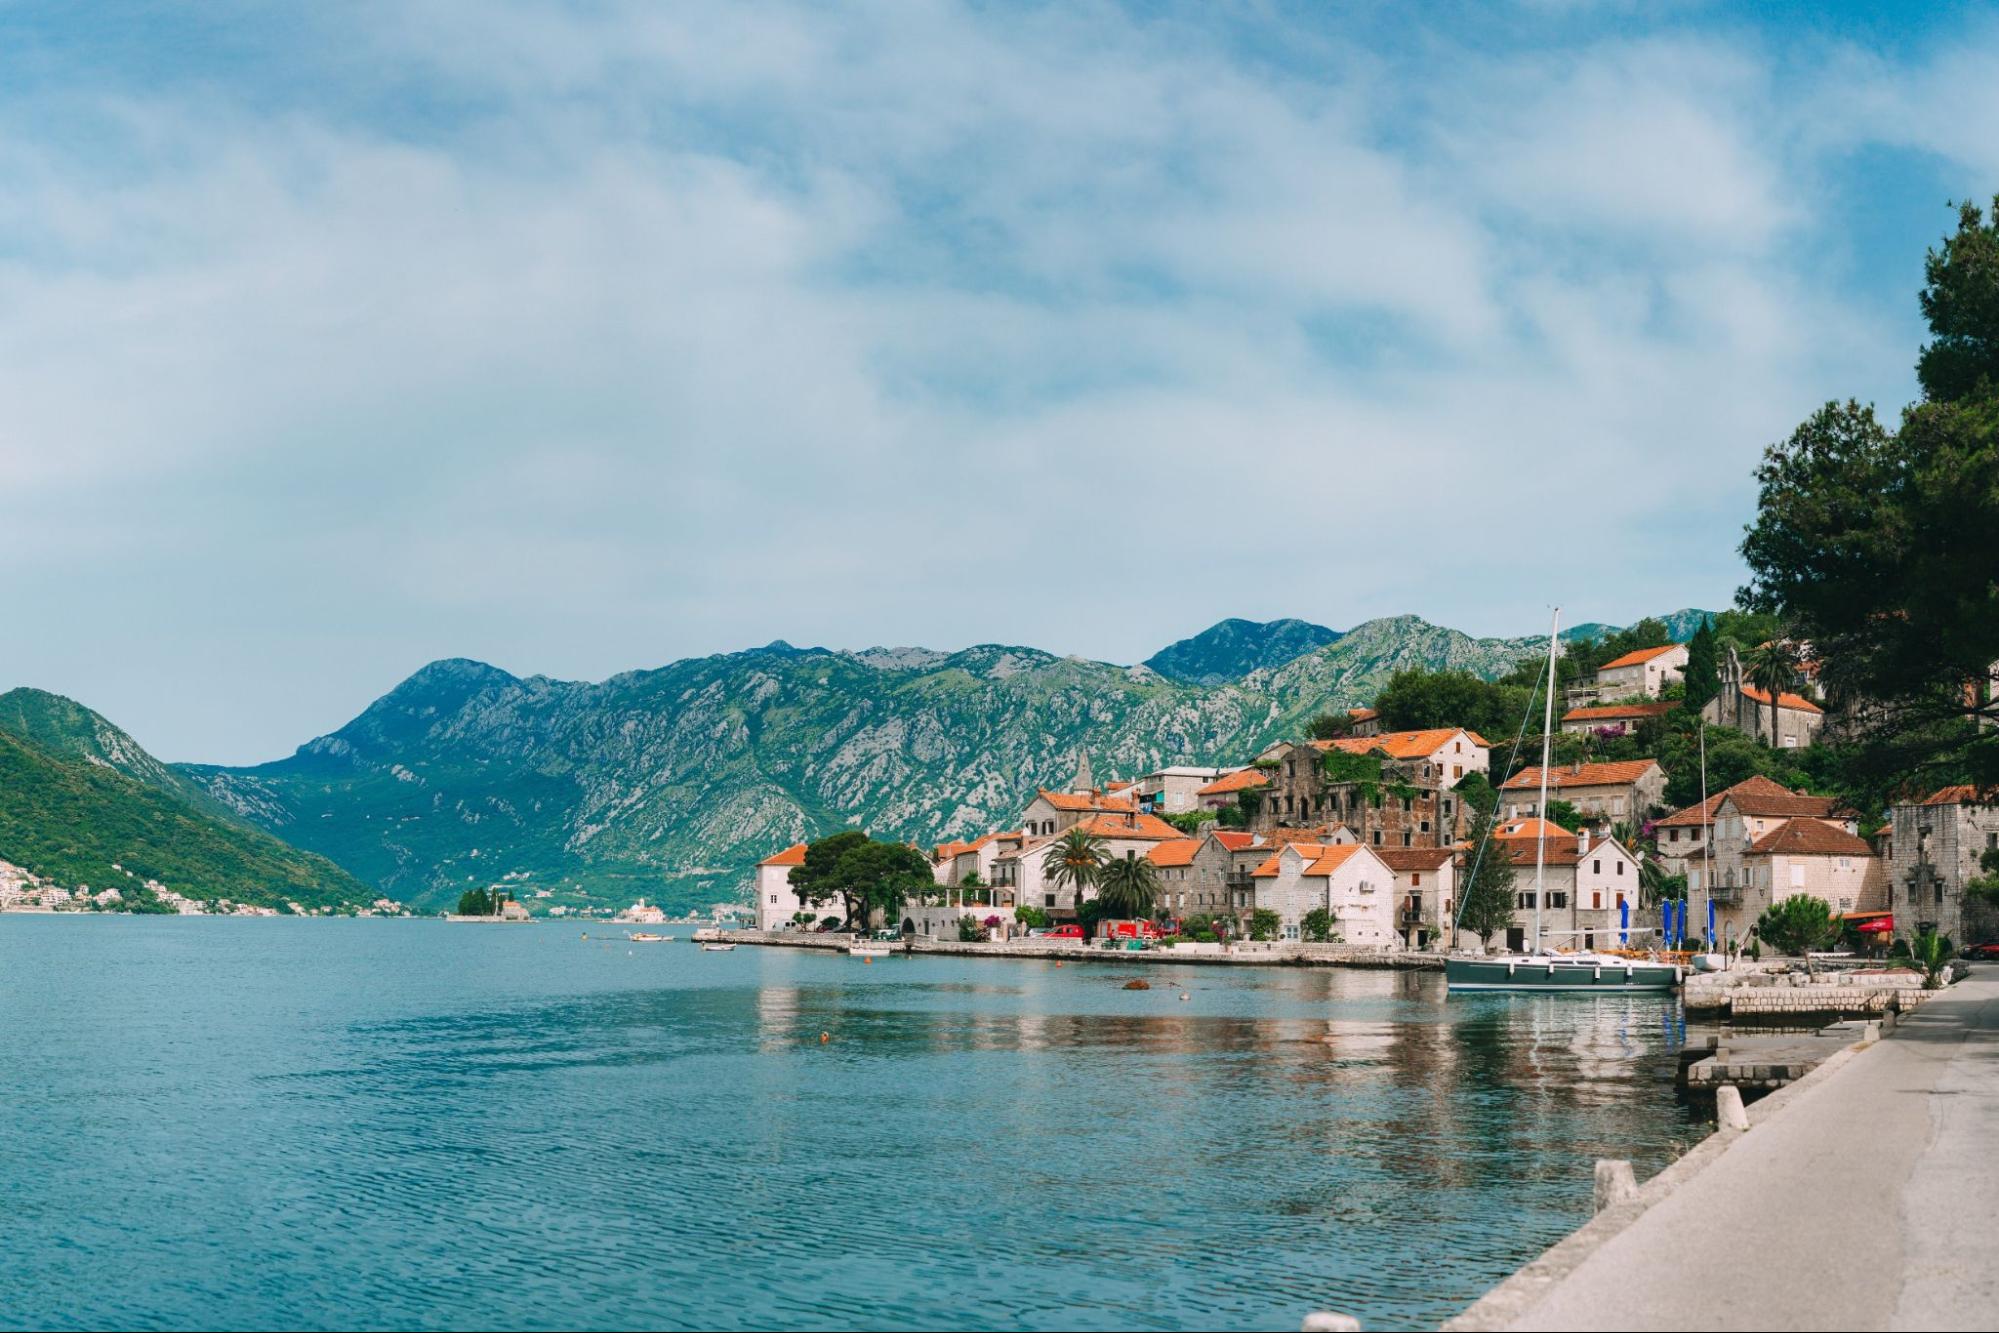 The old town of Perast on the shore of Kotor Bay, Montenegro. The ancient architecture of the Adriatic and the Balkans. Fishermens cities of Europe.